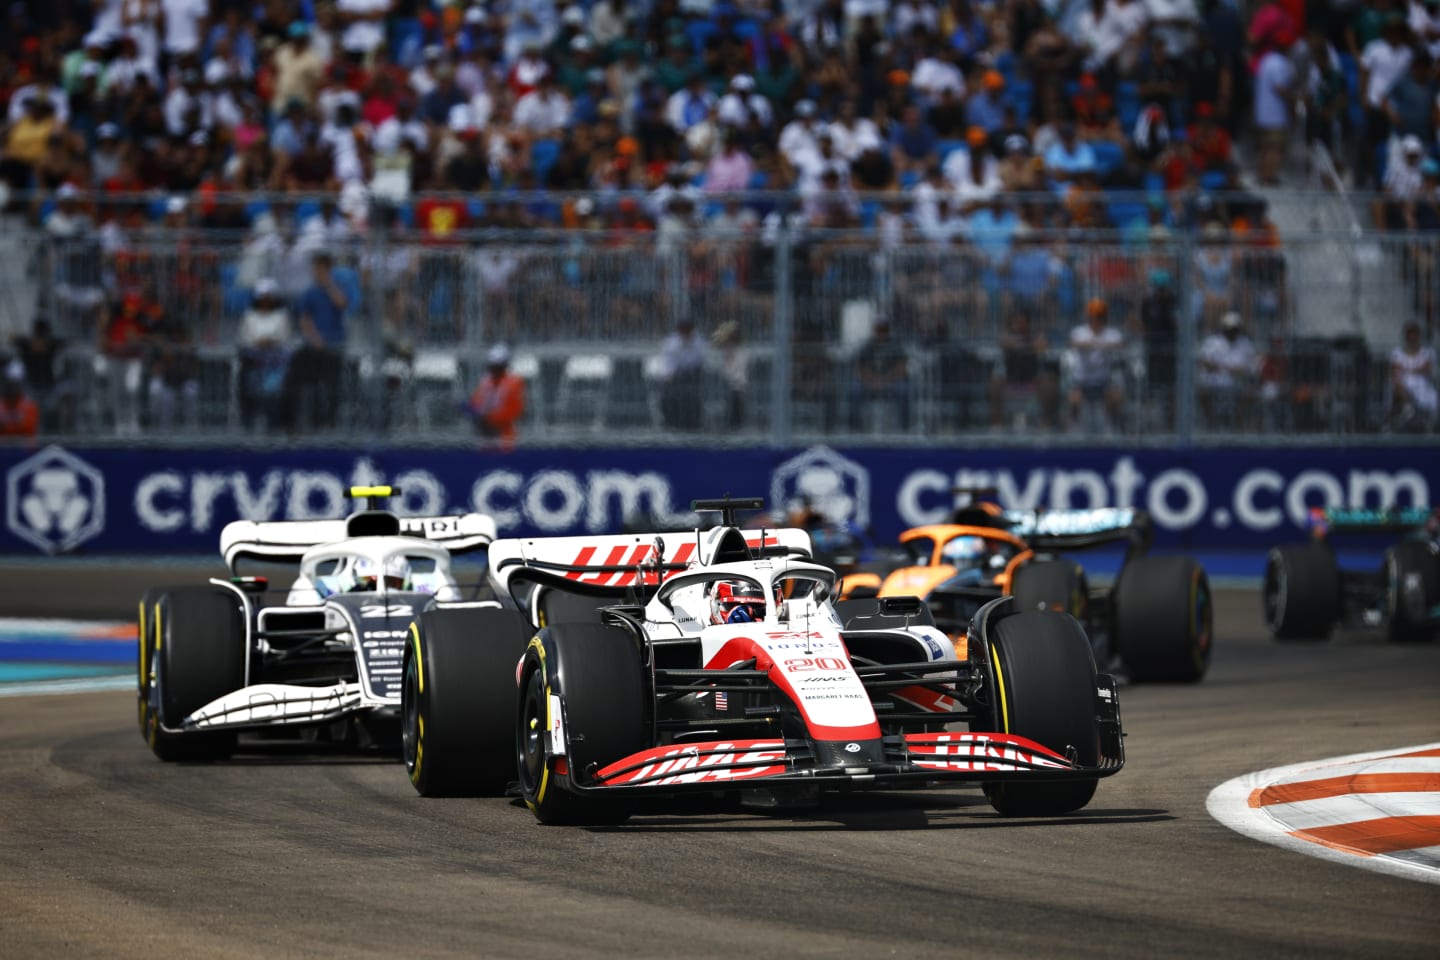 MIAMI, FLORIDA - MAY 08: Kevin Magnussen of Denmark driving the (20) Haas F1 VF-22 Ferrari leads Yuki Tsunoda of Japan driving the (22) Scuderia AlphaTauri AT03 during the F1 Grand Prix of Miami at the Miami International Autodrome on May 08, 2022 in Miami, Florida. (Photo by Jared C. Tilton/Getty Images)